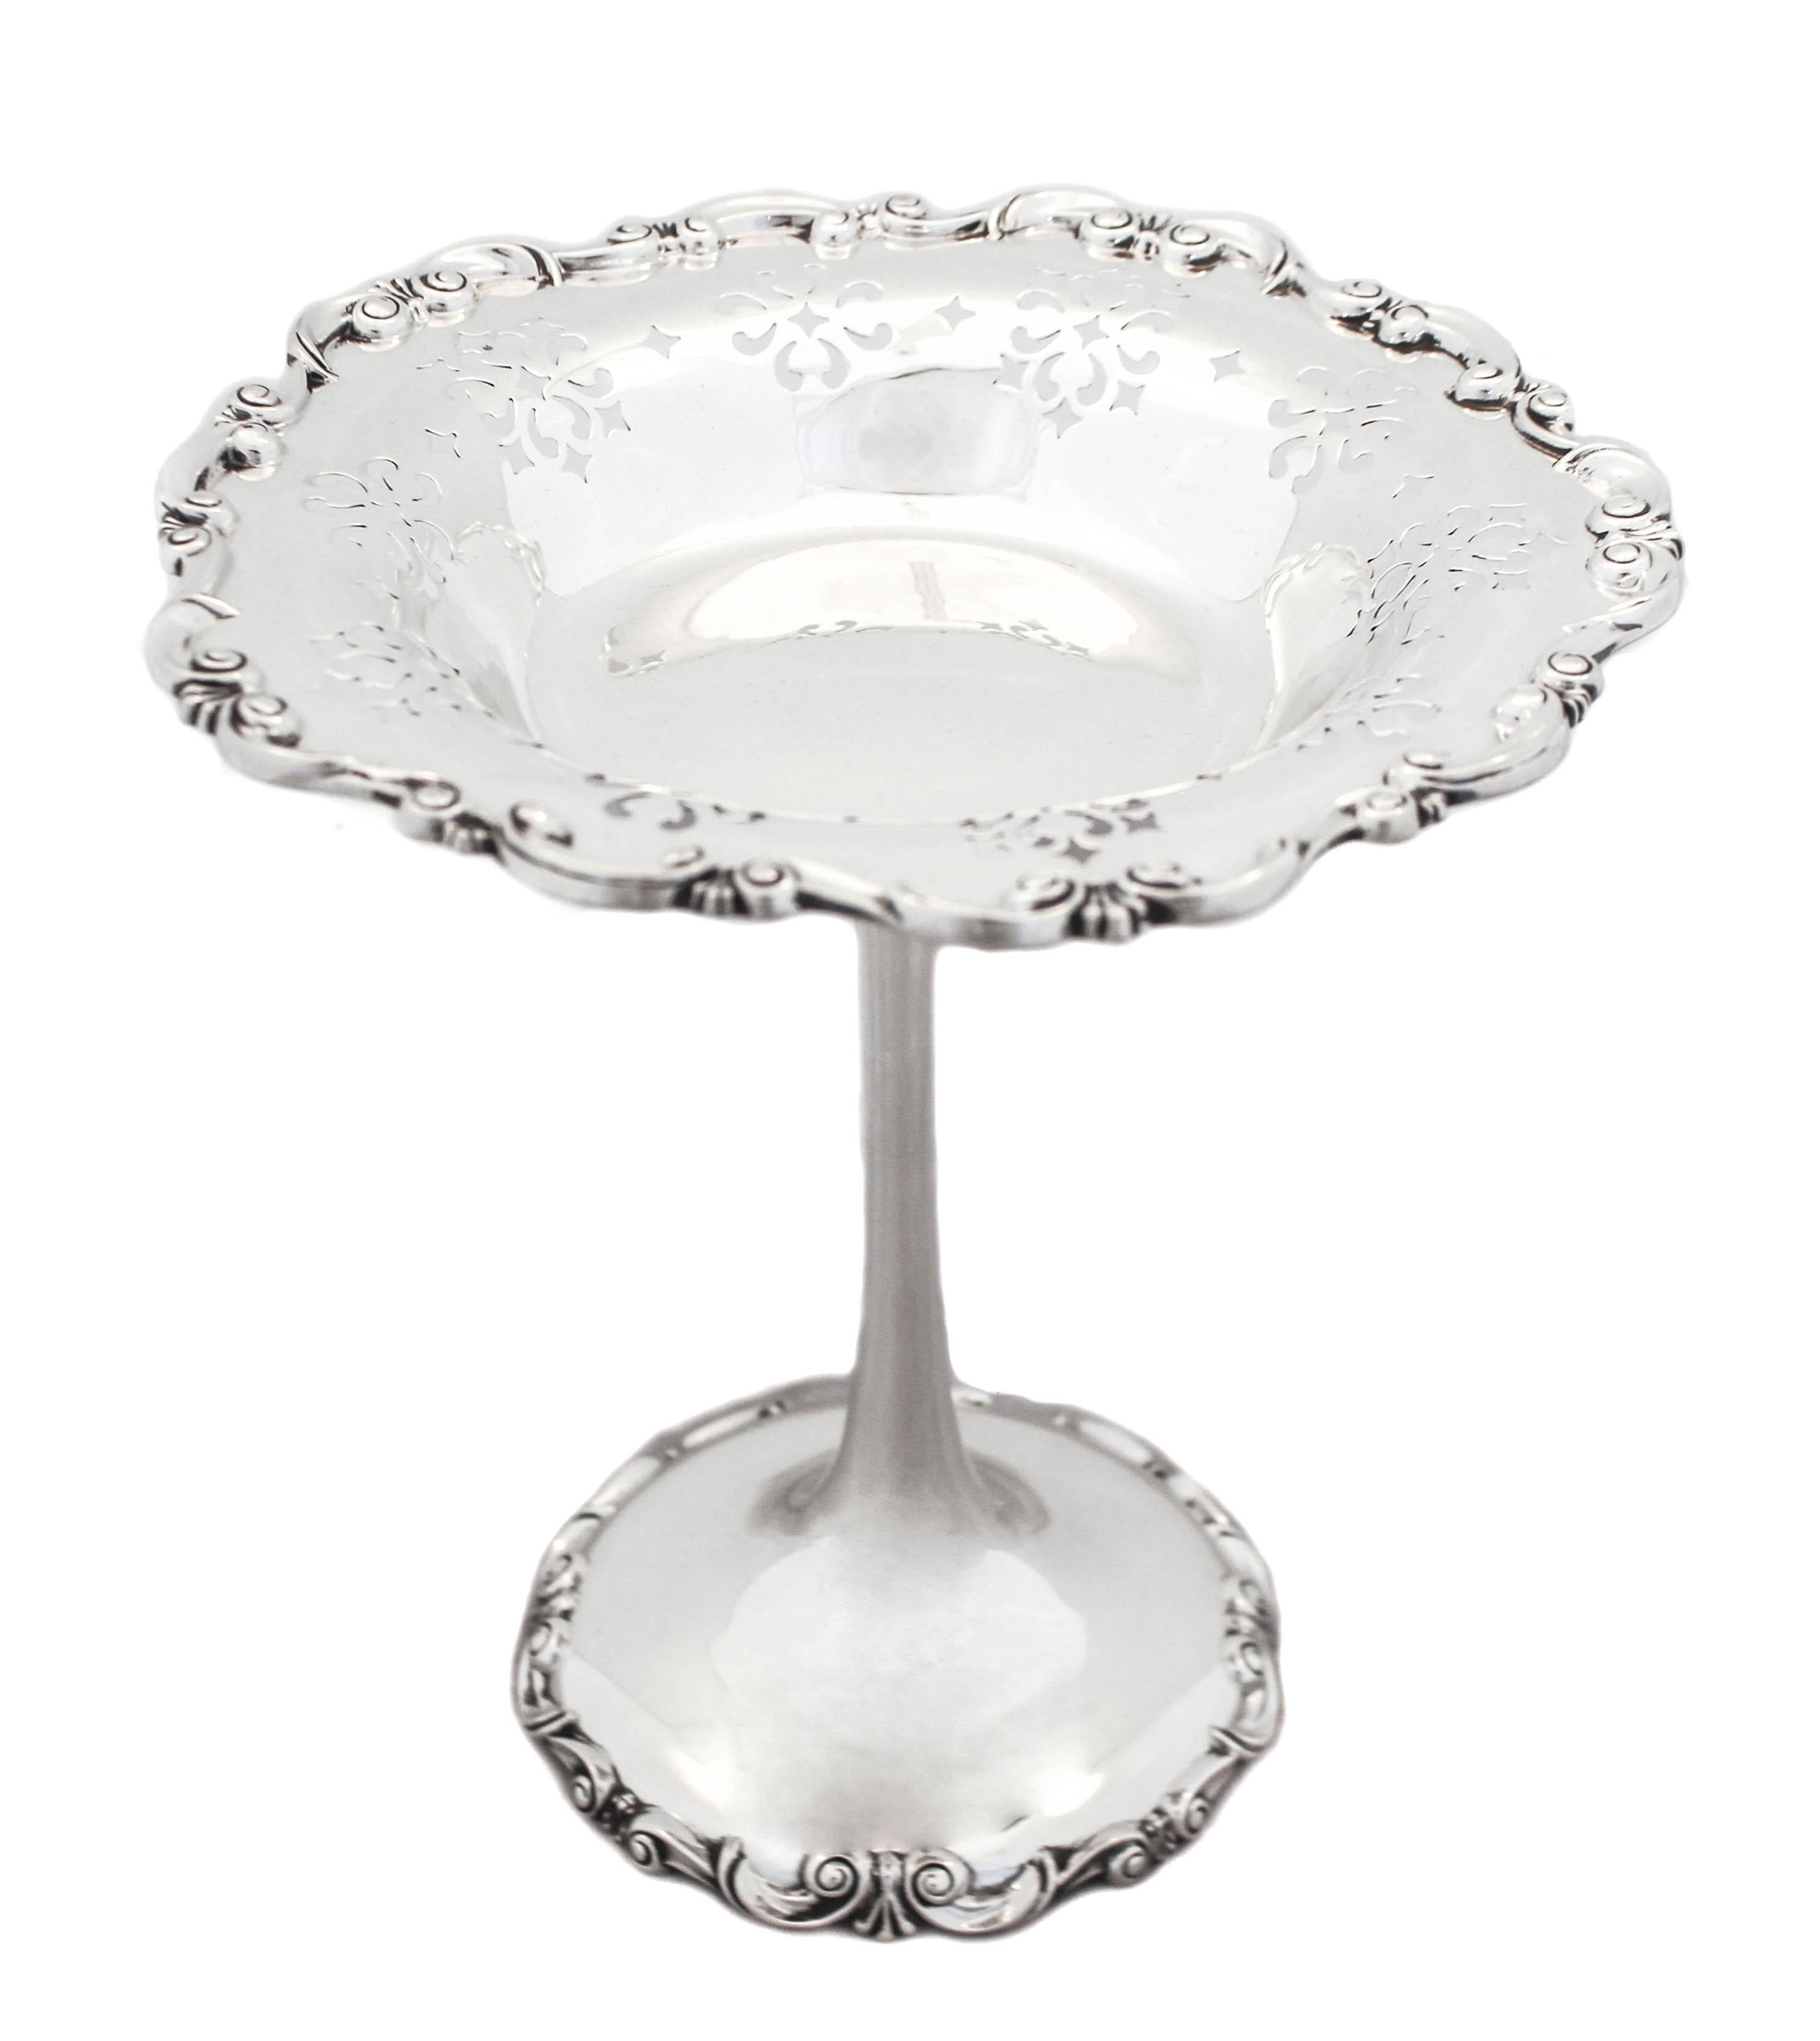 Being offered is a pair of sterling silver compotes by Towle Silversmiths. They have a scalloped rim and base with a gadroon design wrapping around the border. There is also a decorative cutout design around the top. These compotes are extra tall